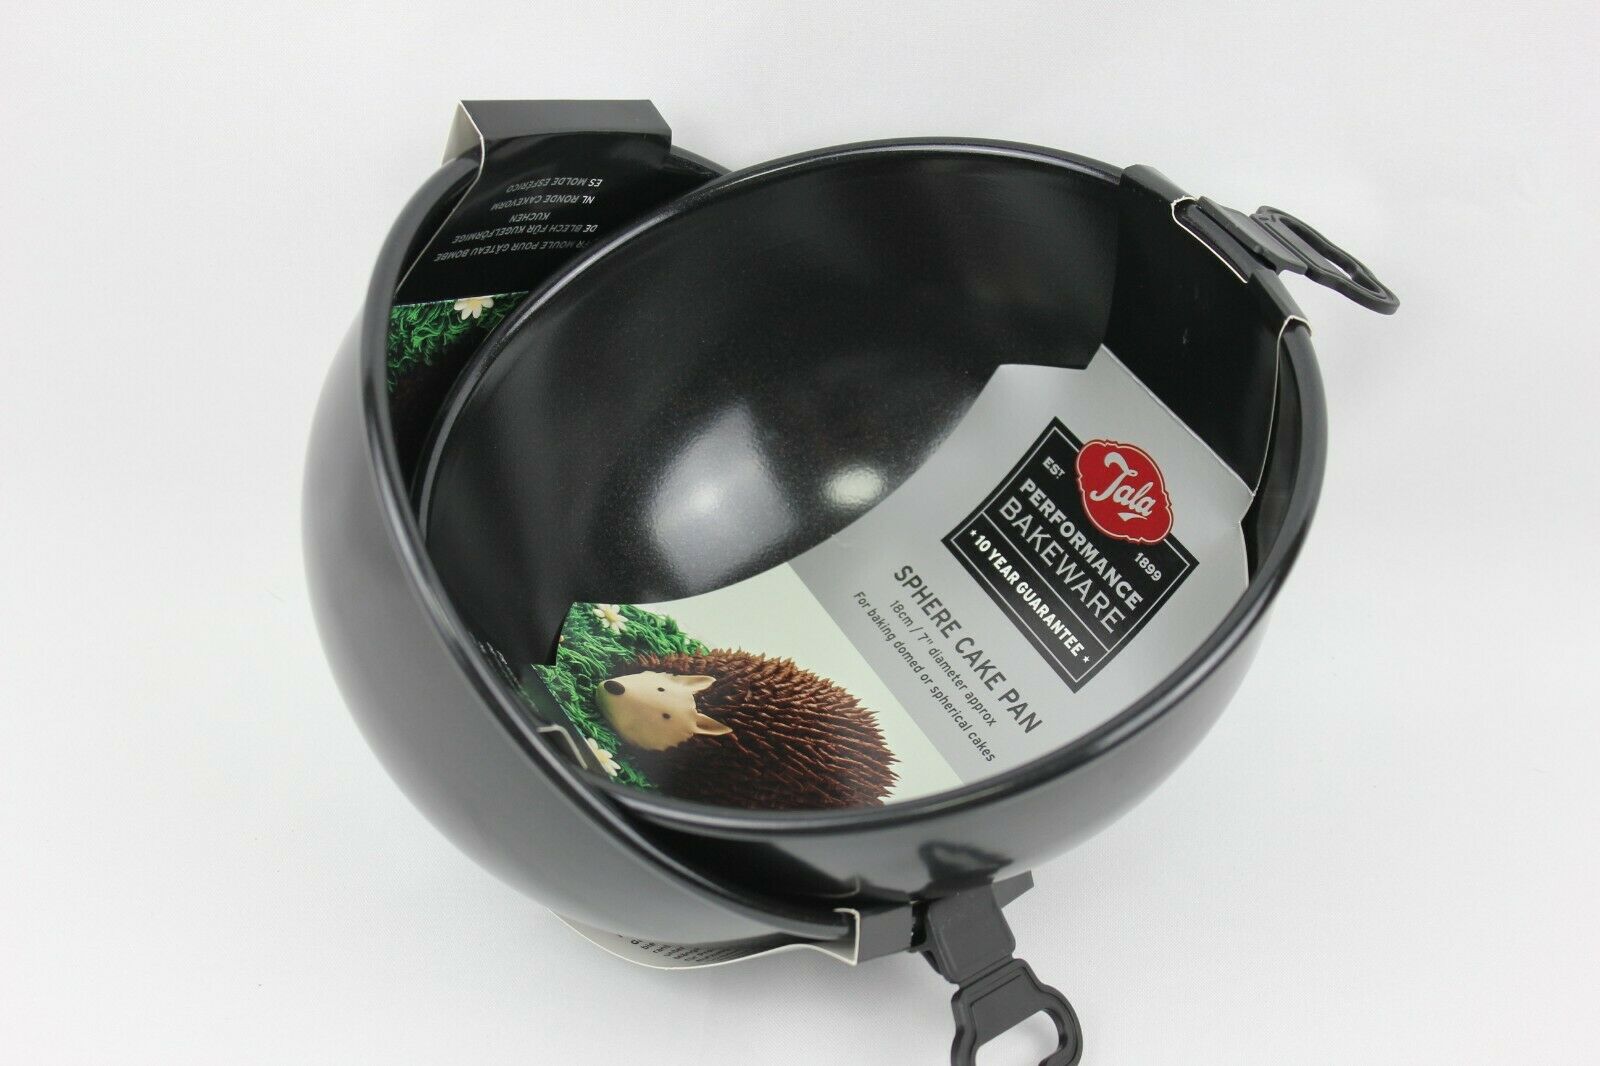 attachment-https://www.cupcakeaddicts.co.uk/wp-content/uploads/imported/6/2-Tala-Performance-Bakeware-Sphere-Round-Ball-Soccer-Non-Stick-Cake-Pan-Tin-18cm-324484383606.jpg